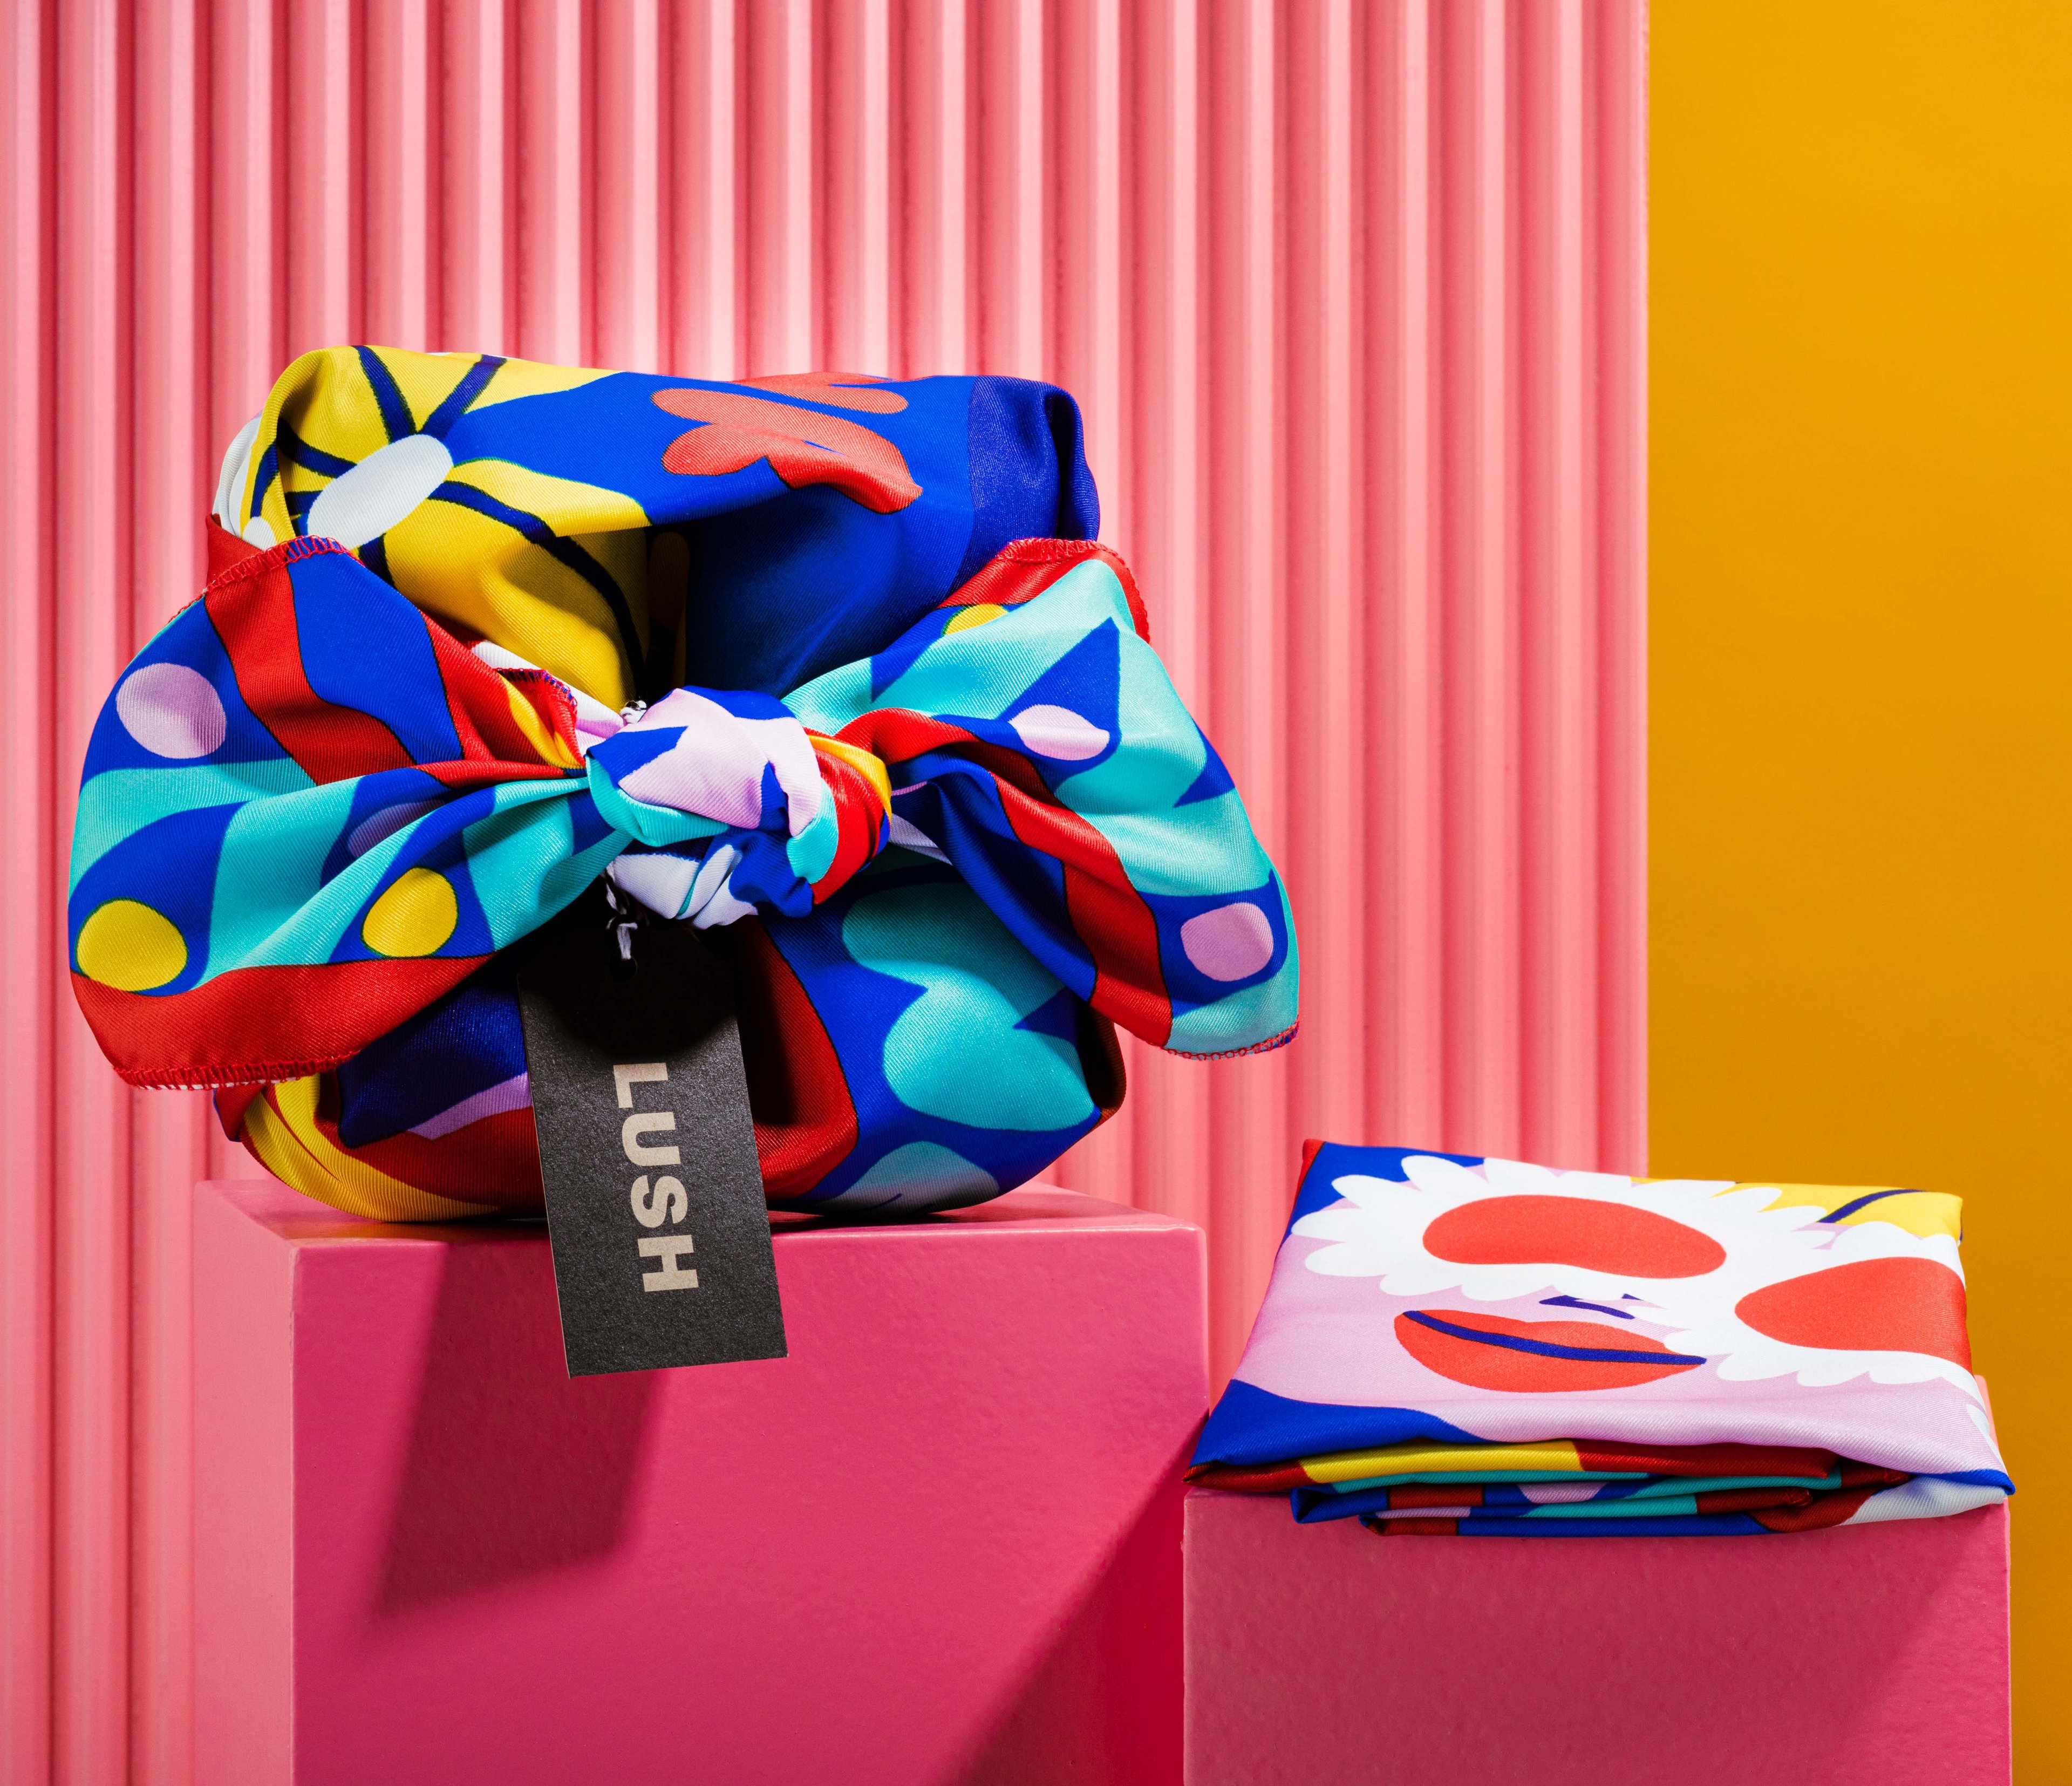 The Knot Wrap is decoratively wrapped with a Lush gift tag, alongside one folded, in front of a pink and yellow background. 